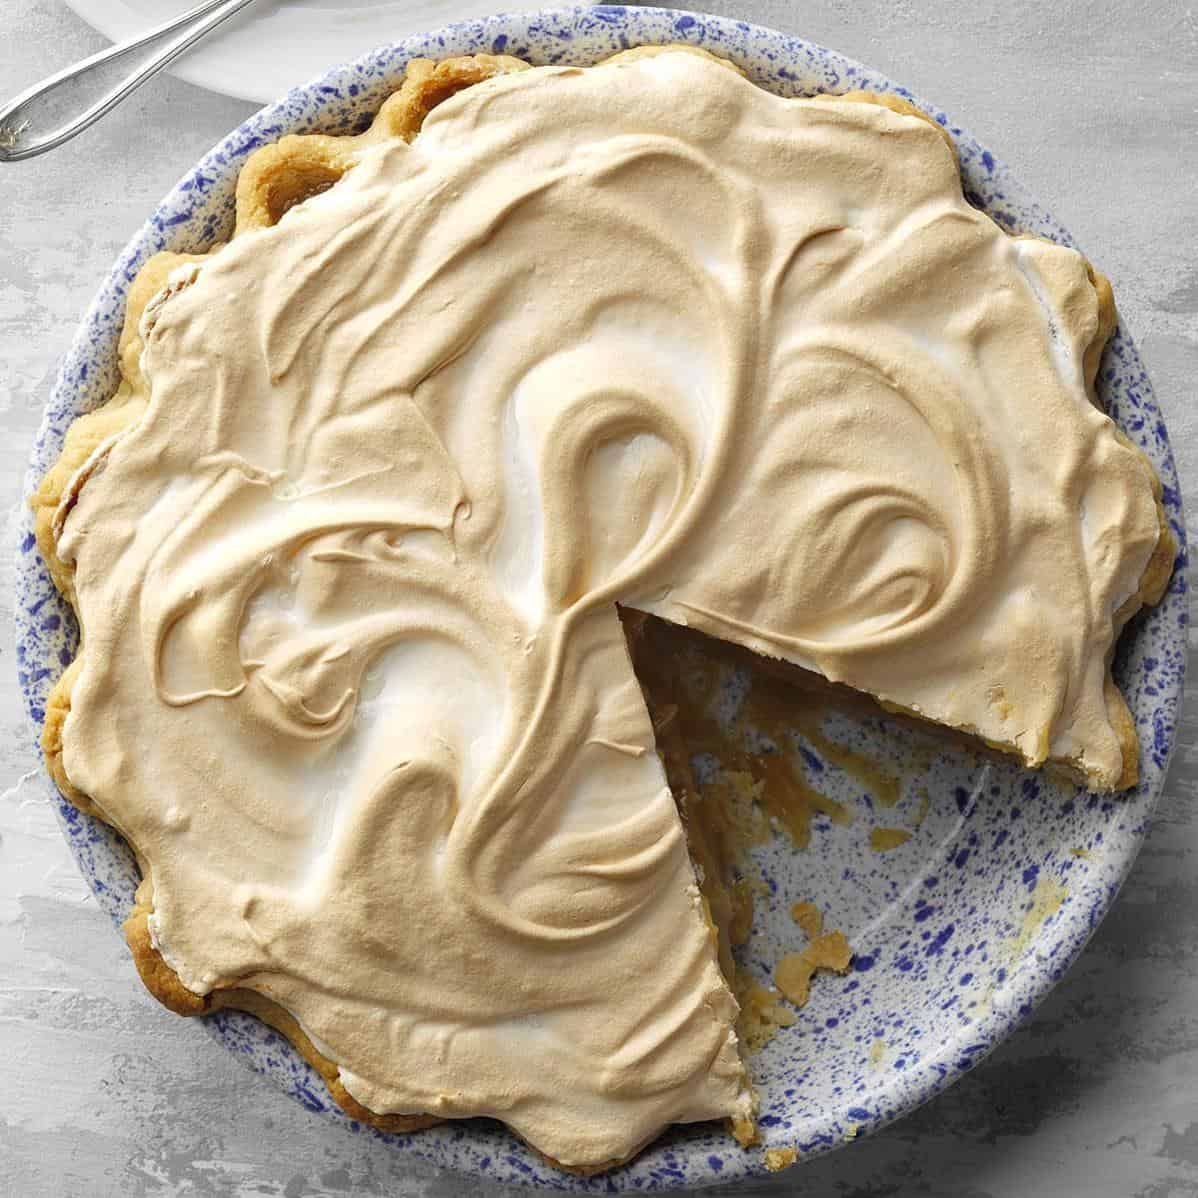  Perfect for holidays or simply as a tasty treat, this butterscotch pie is a must-try!